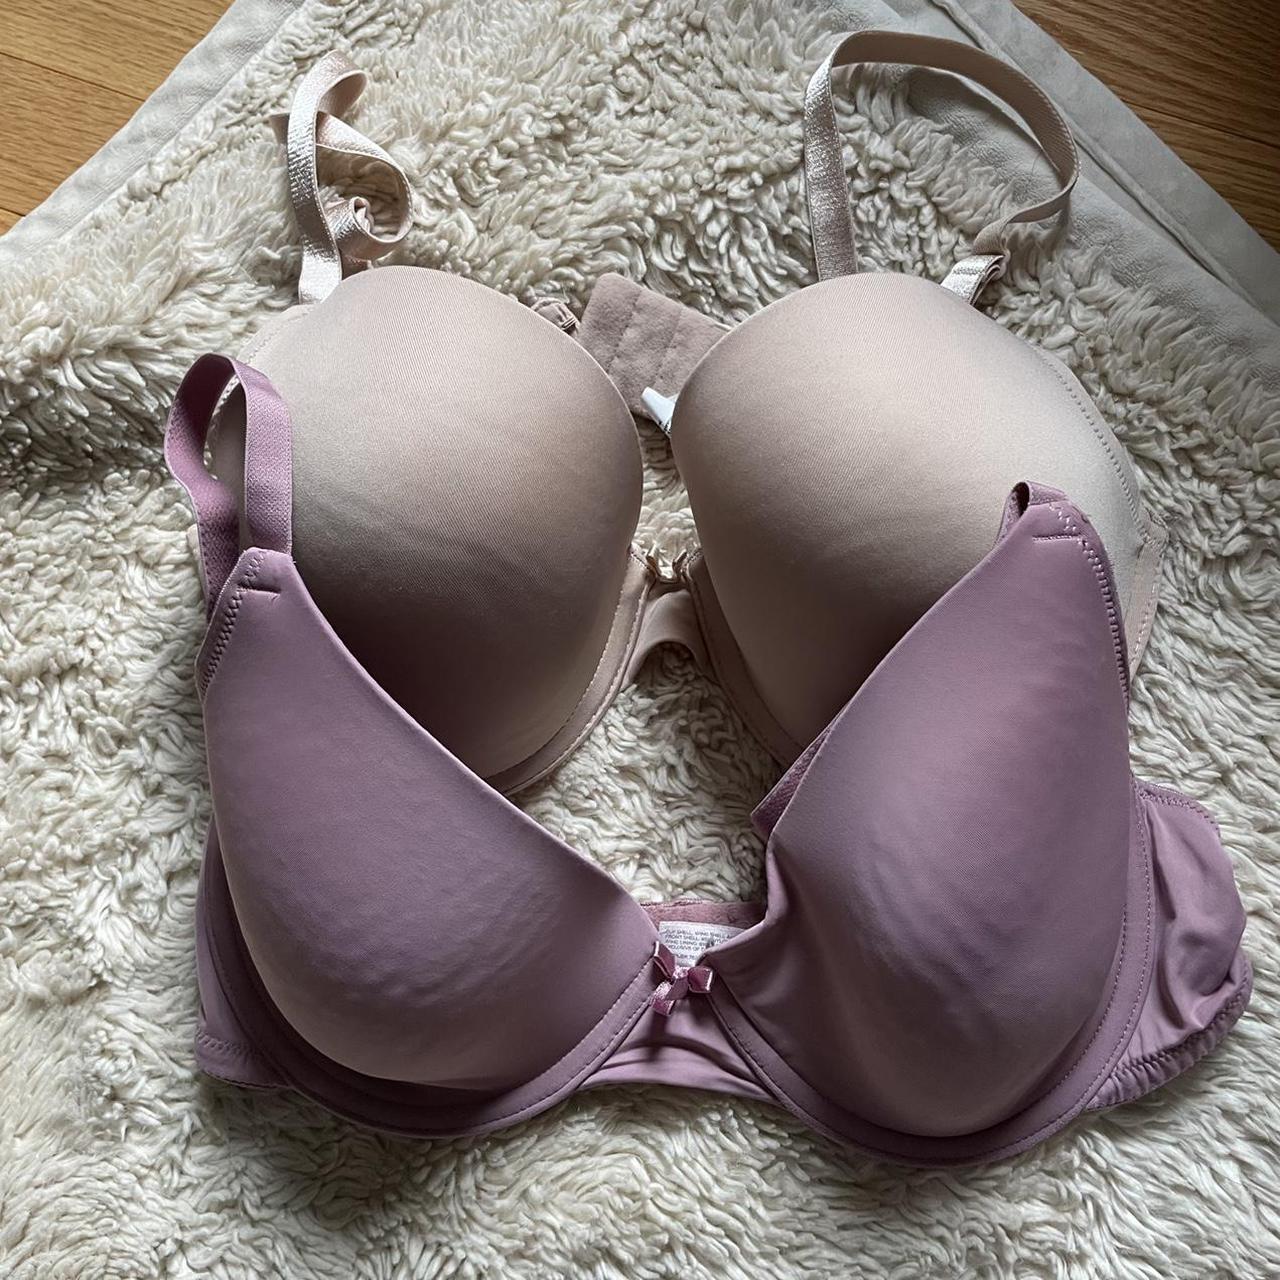 Four 36D bras (tan one is a push-up). Barely worn, - Depop